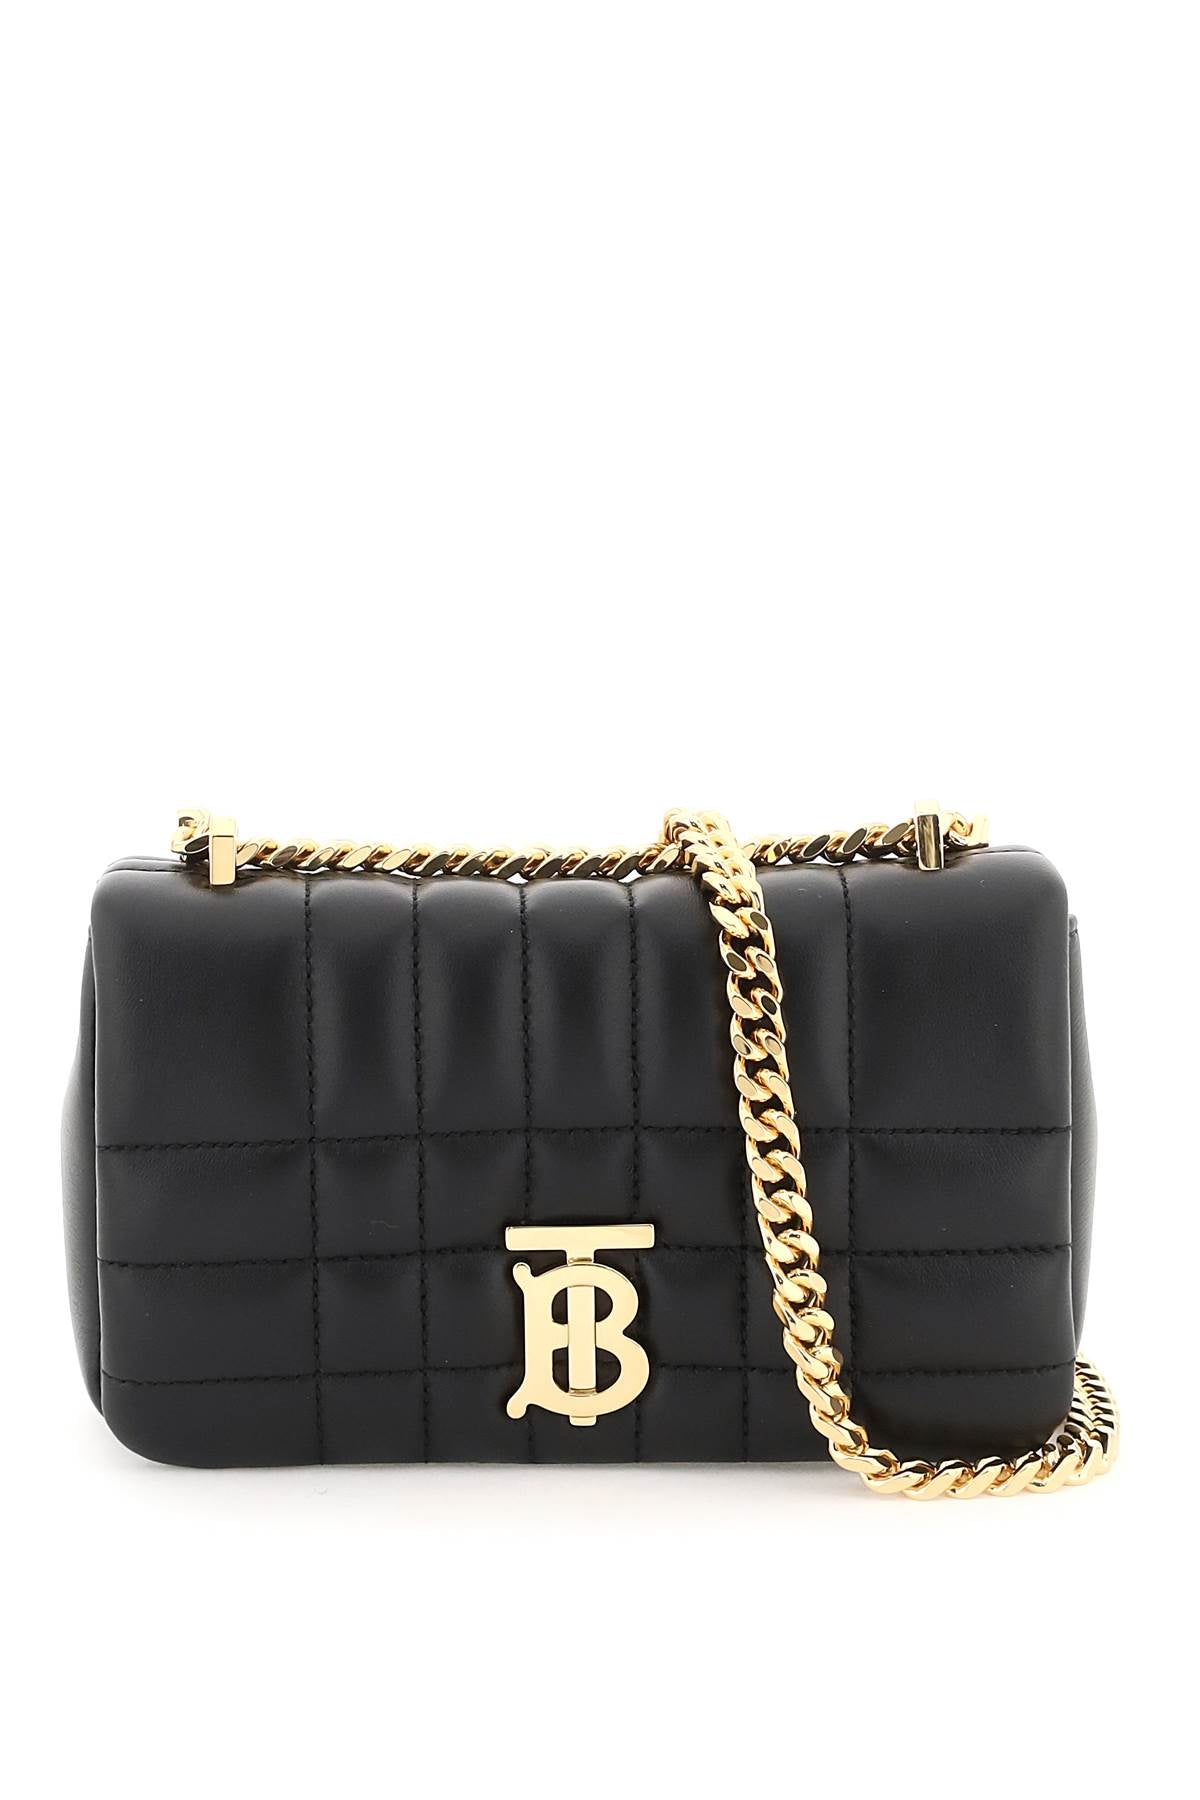 BURBERRY Mini Quilted Leather Lola Shoulder Bag with Gold TB Monogram - Black